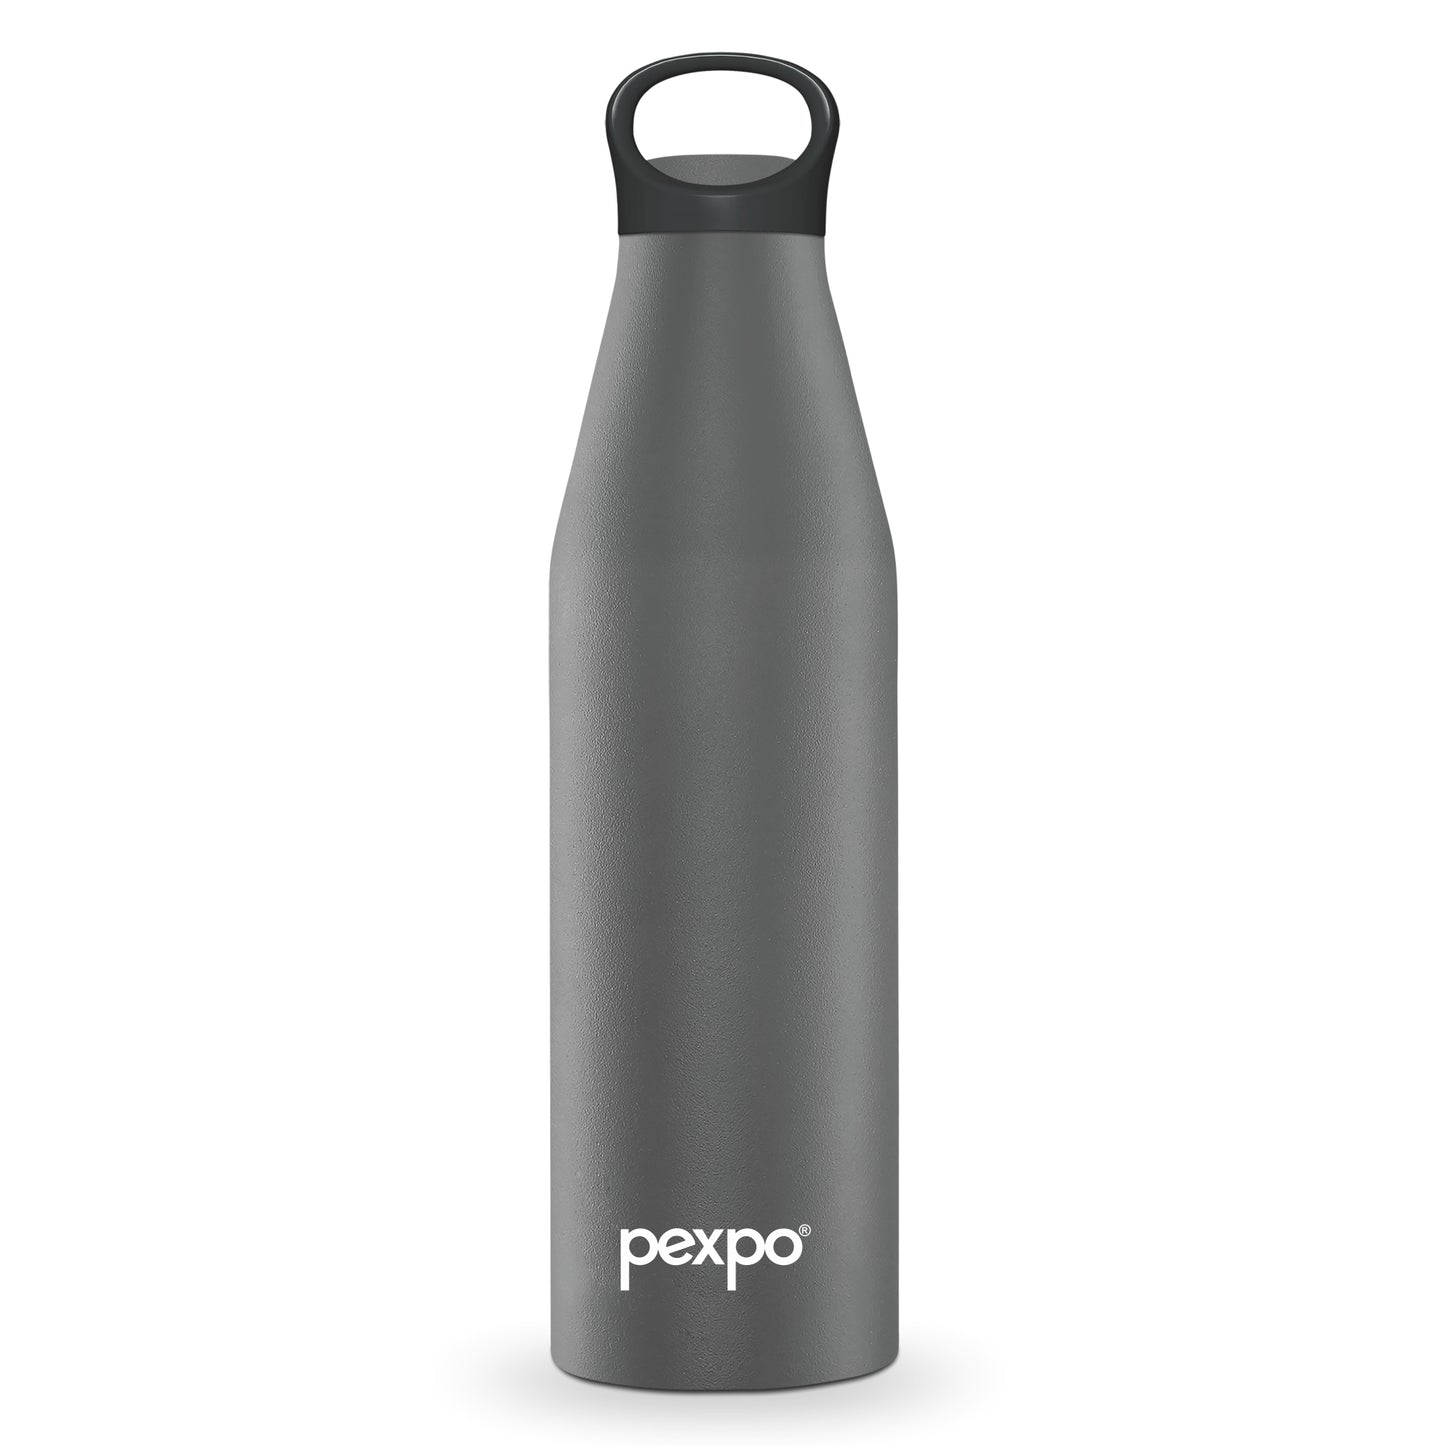 Pexpo Legacy - Stainless Steel Vacuum Insulated Bottle | 24/7 Hot & sweat free 100% Safe, |Leak Proof | BPA Free|